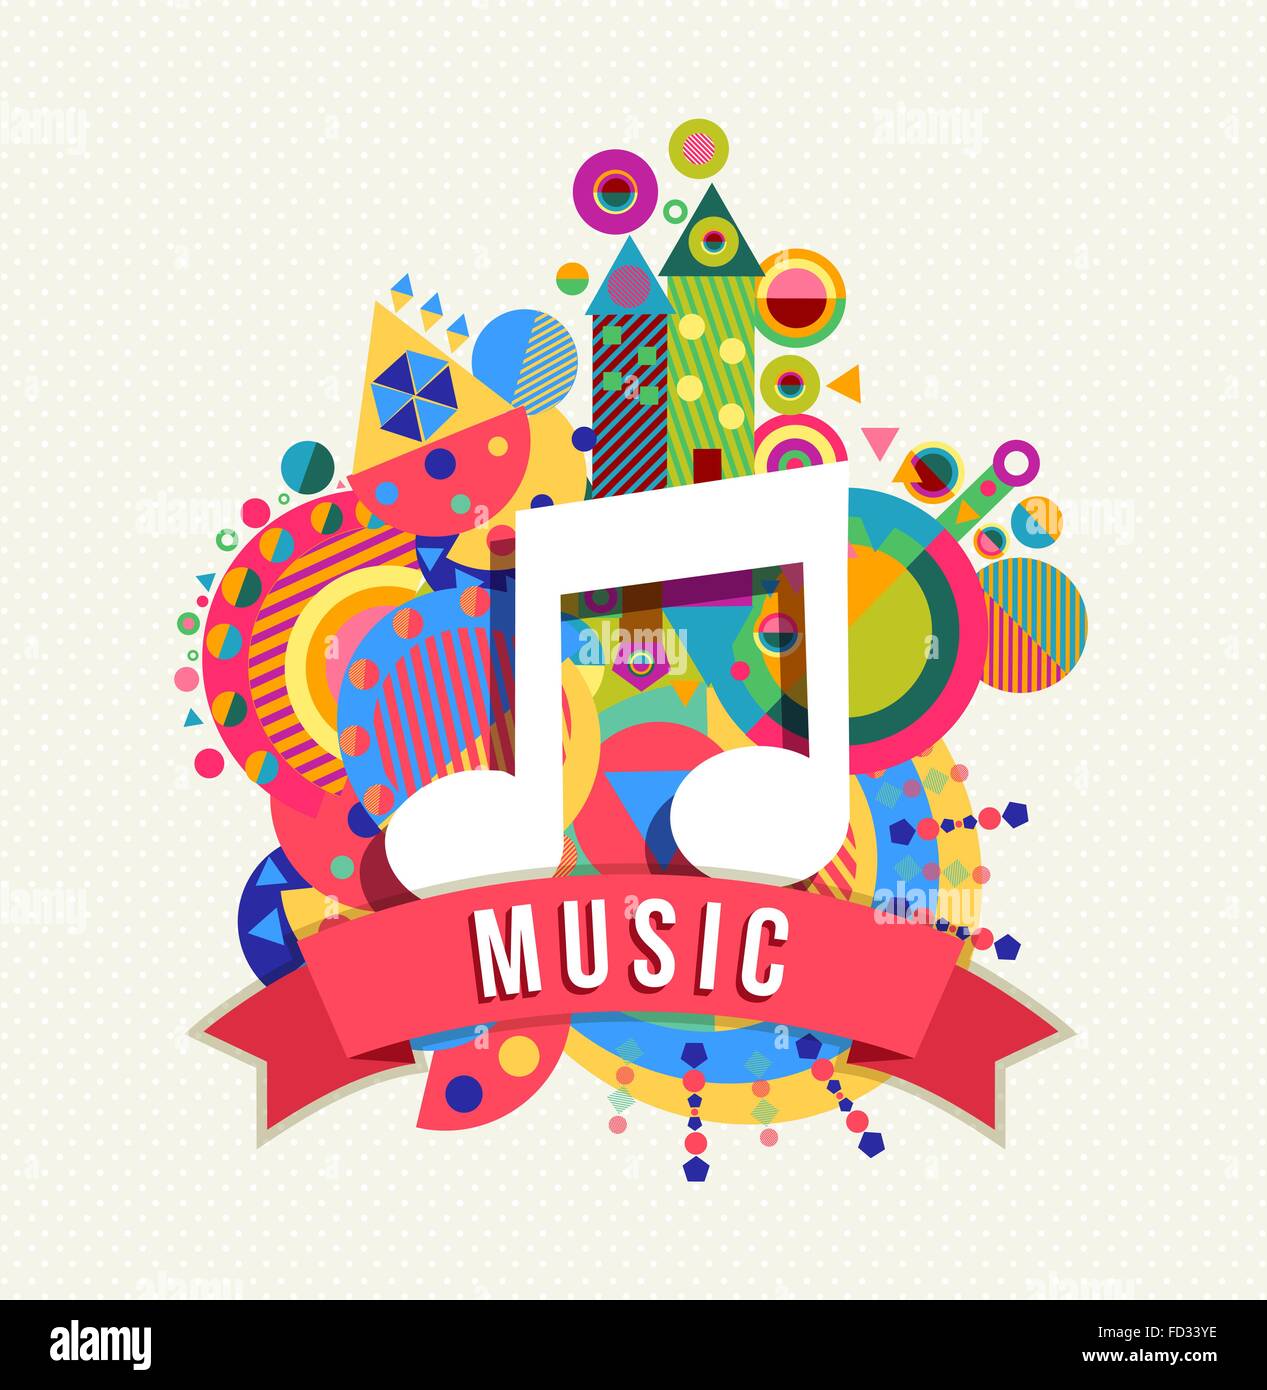 Music note icon, audio sound concept design with text label and colorful geometry shape background. EPS10 vector. Stock Vector